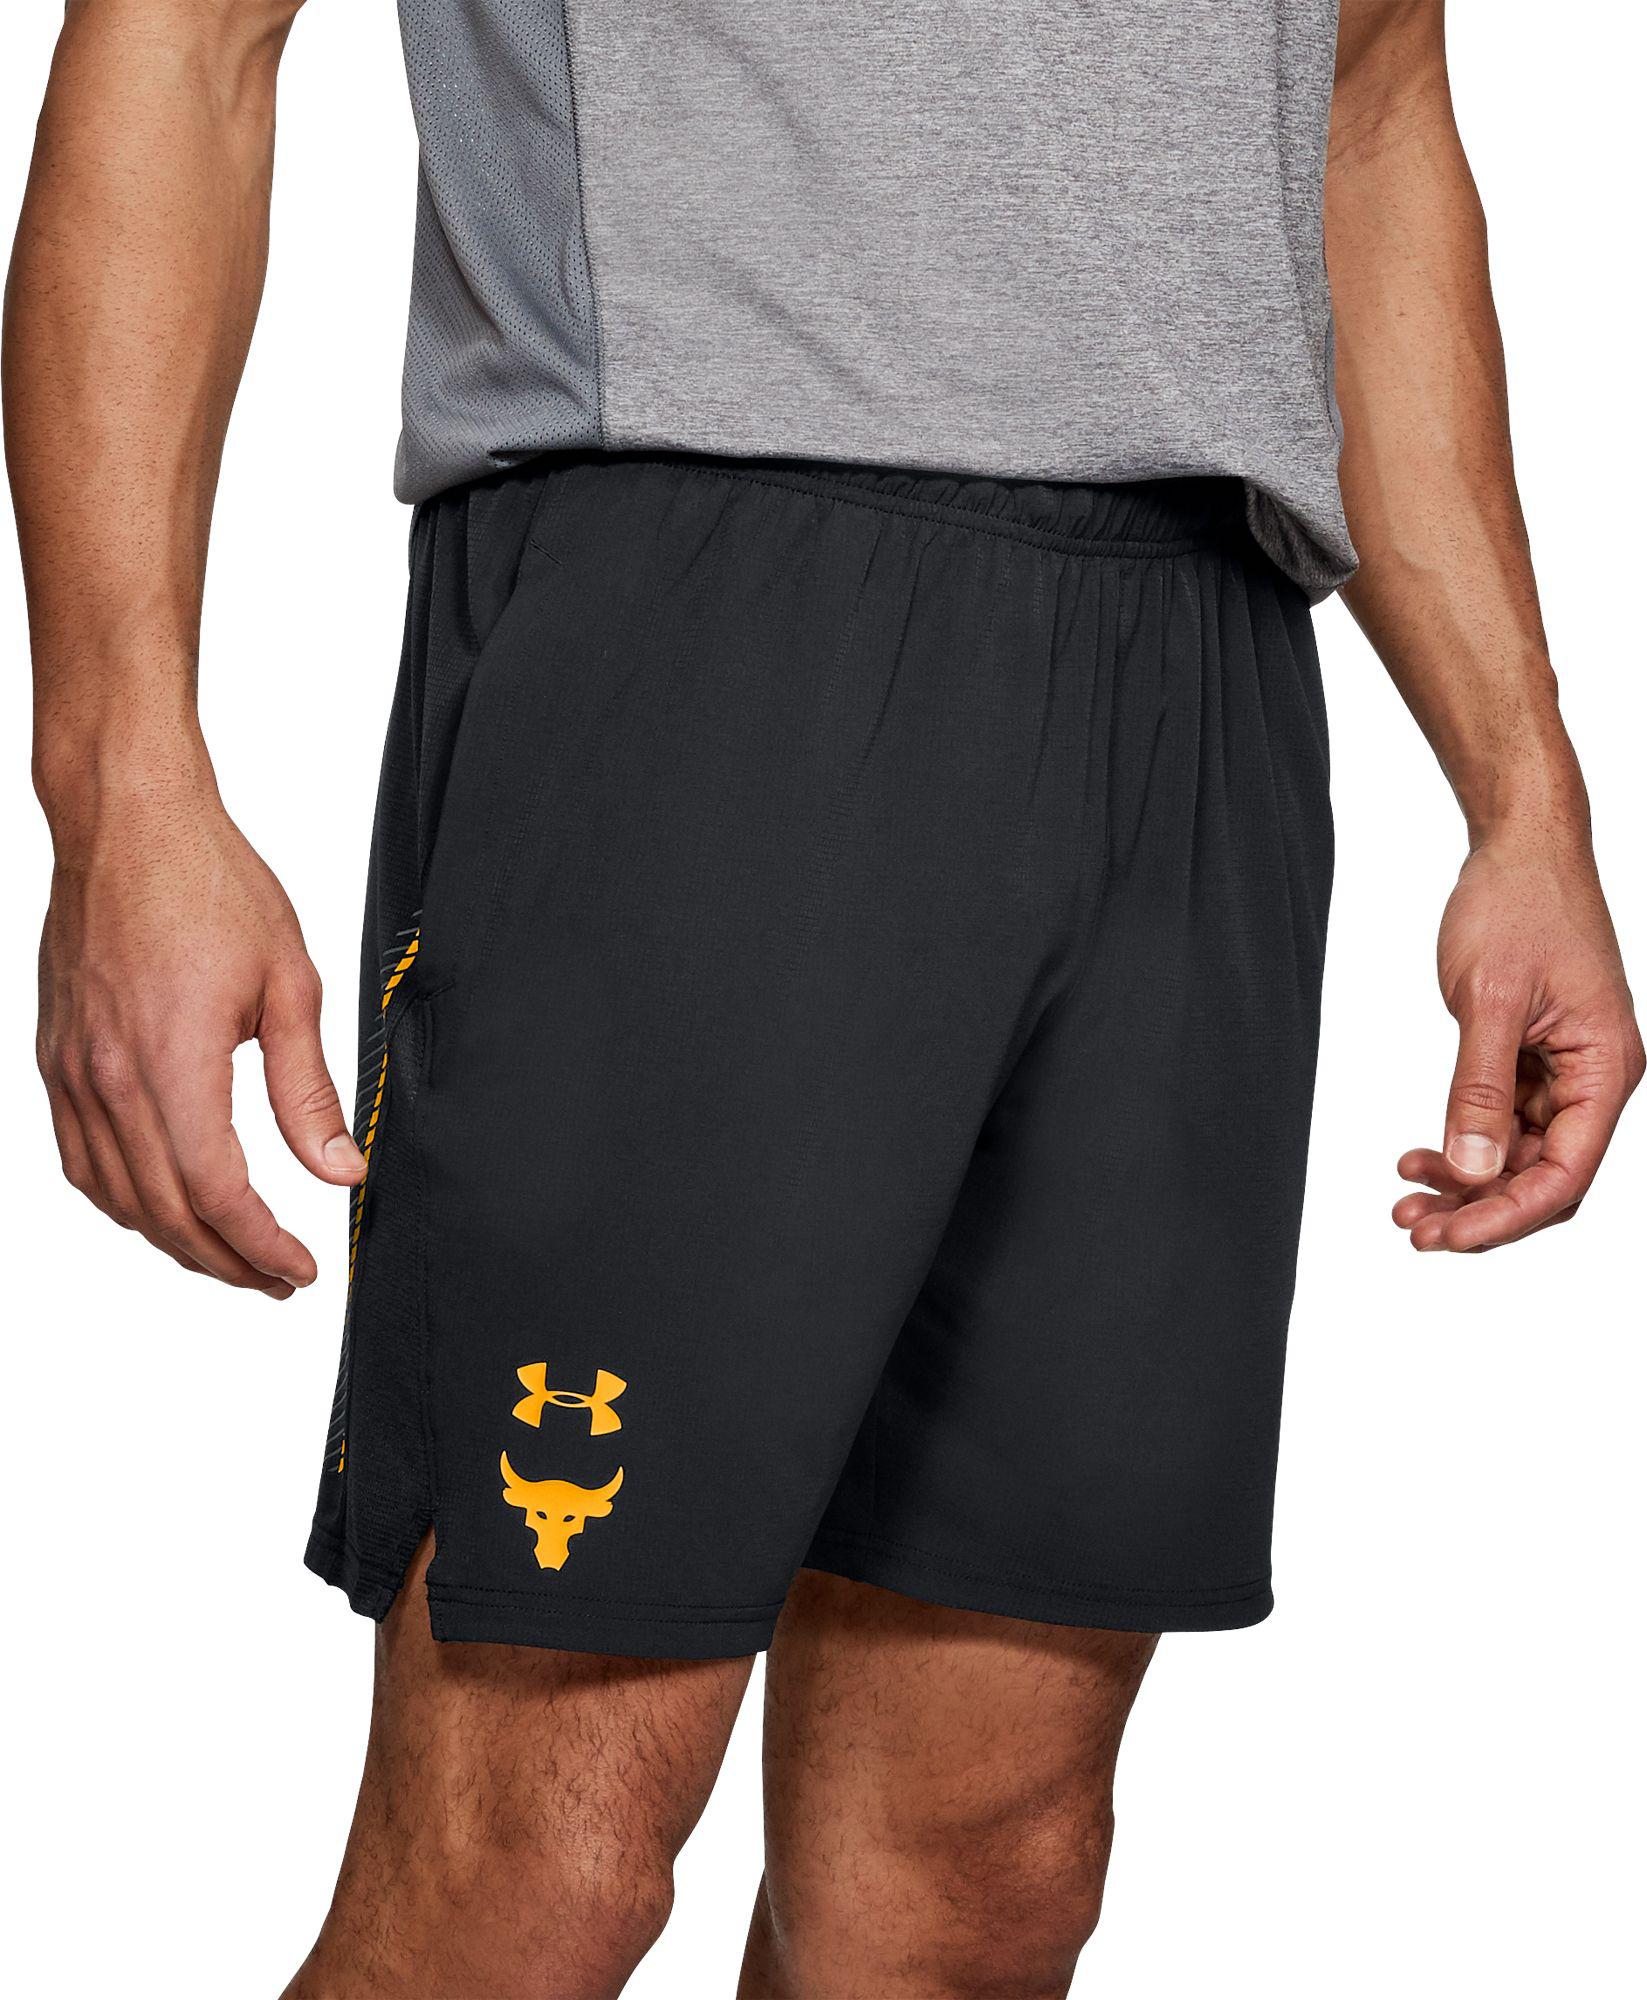 Under Armour Project Rock Cage Shorts in Black for Men - Lyst